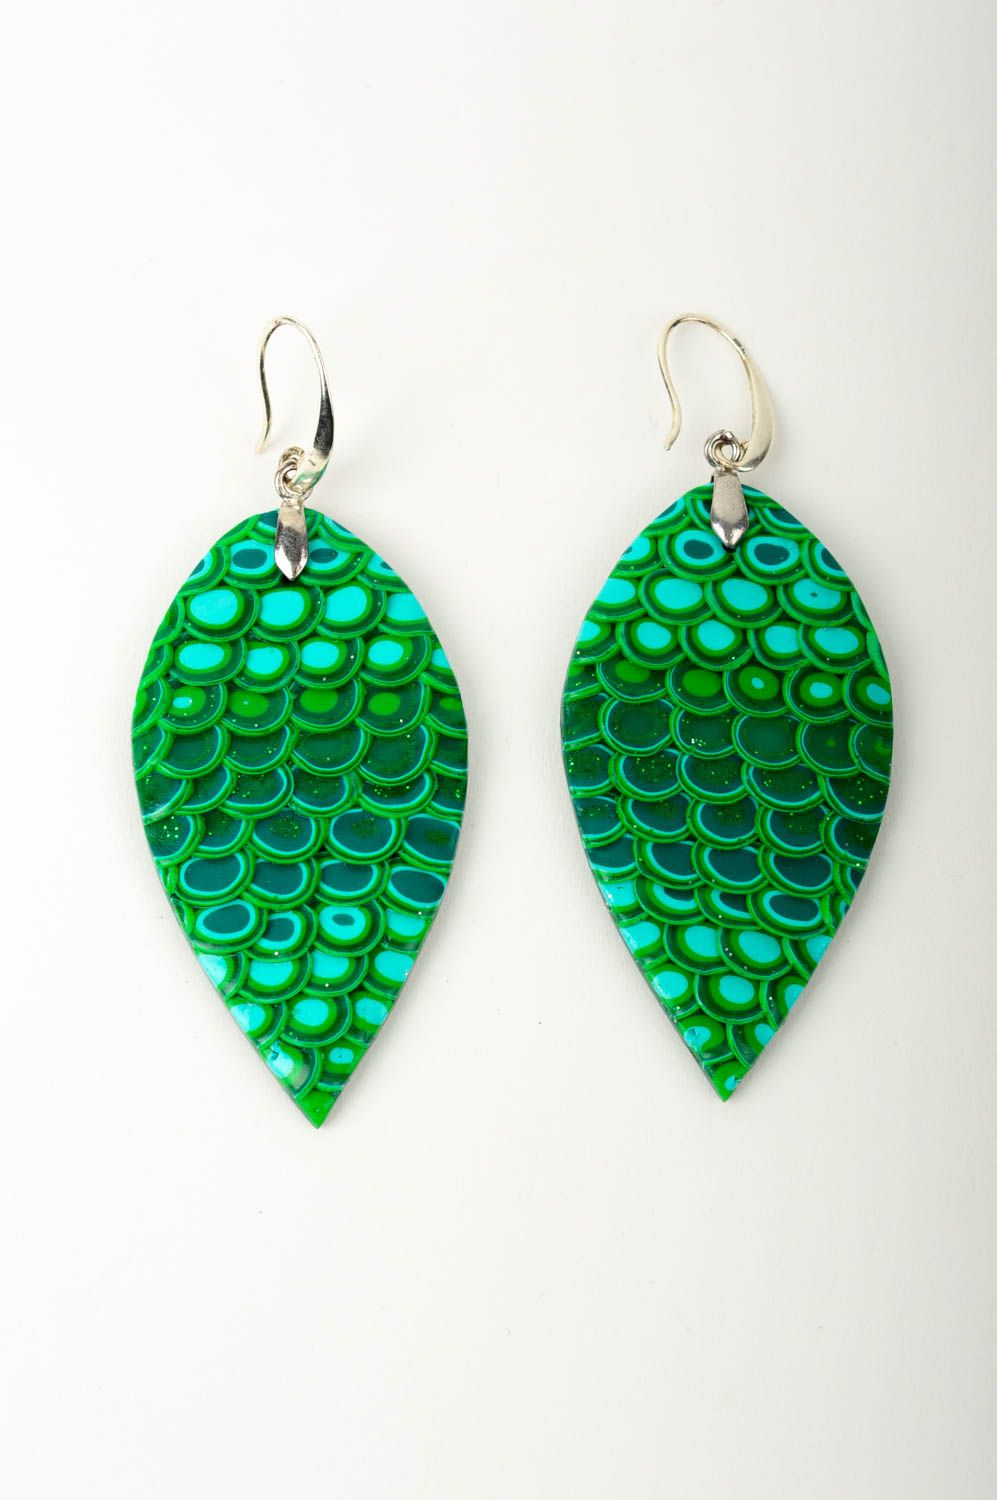 Handcrafted jewelry designer earrings plastic jewelry fashion accessories photo 1